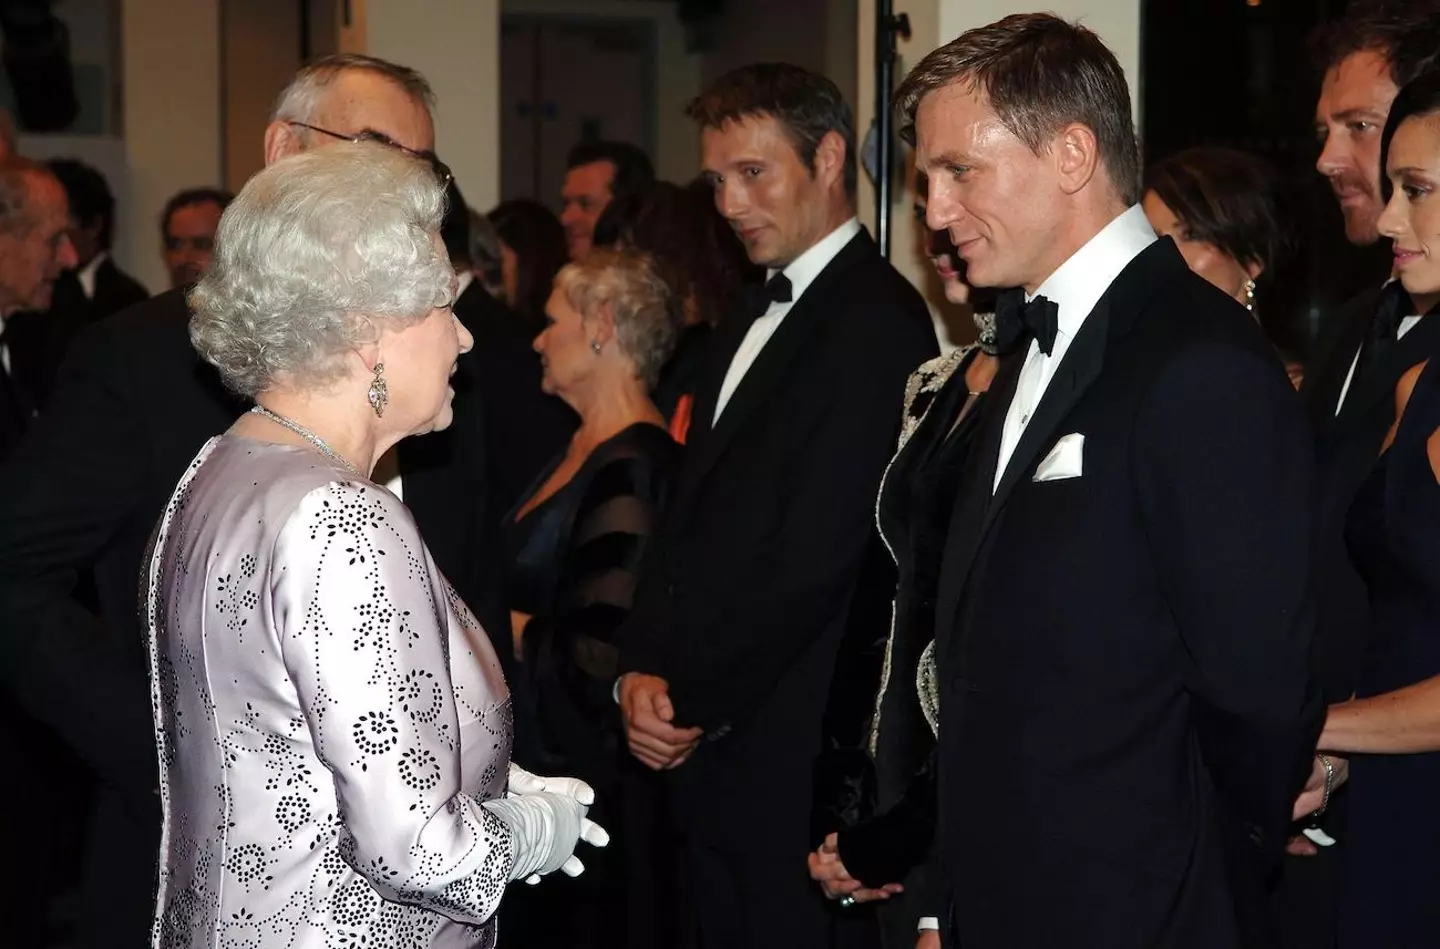 Daniel Craig once recalled a ‘very funny’ joke the Queen made at the actor's expense.